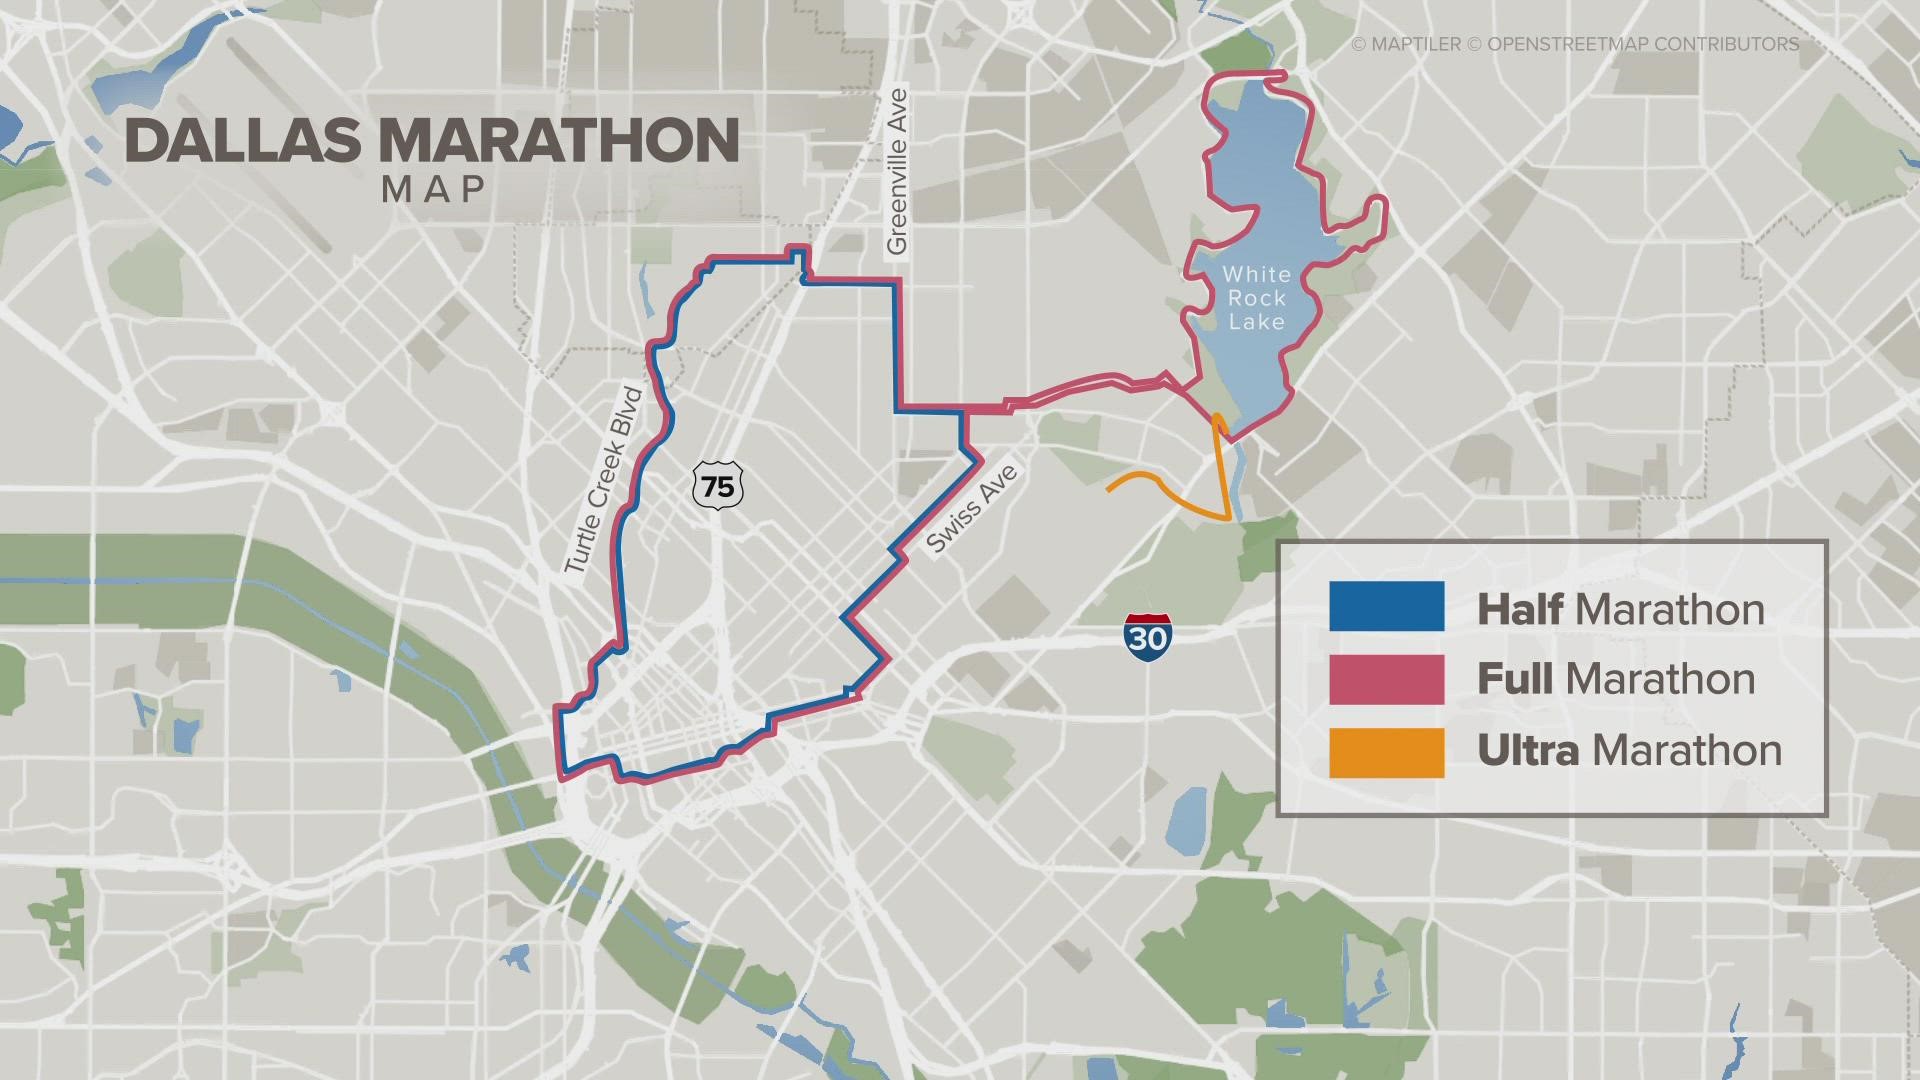 Dallas Marathon Here's what you need to know about road closures